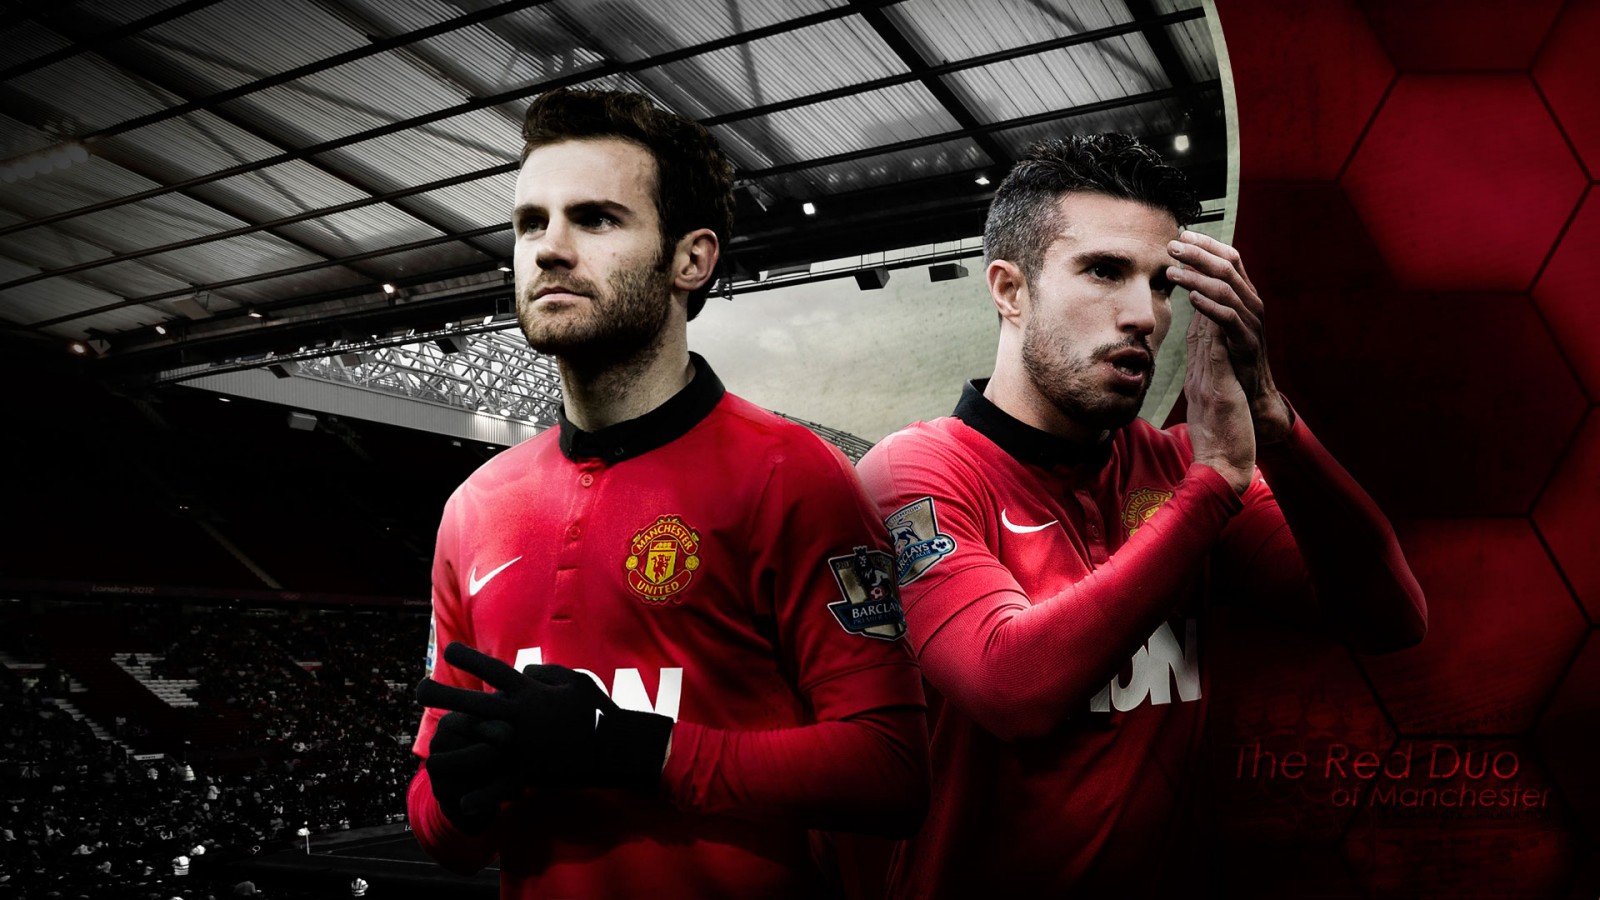 Image for wallpaper manchester united 2014 2015 wallpaper download